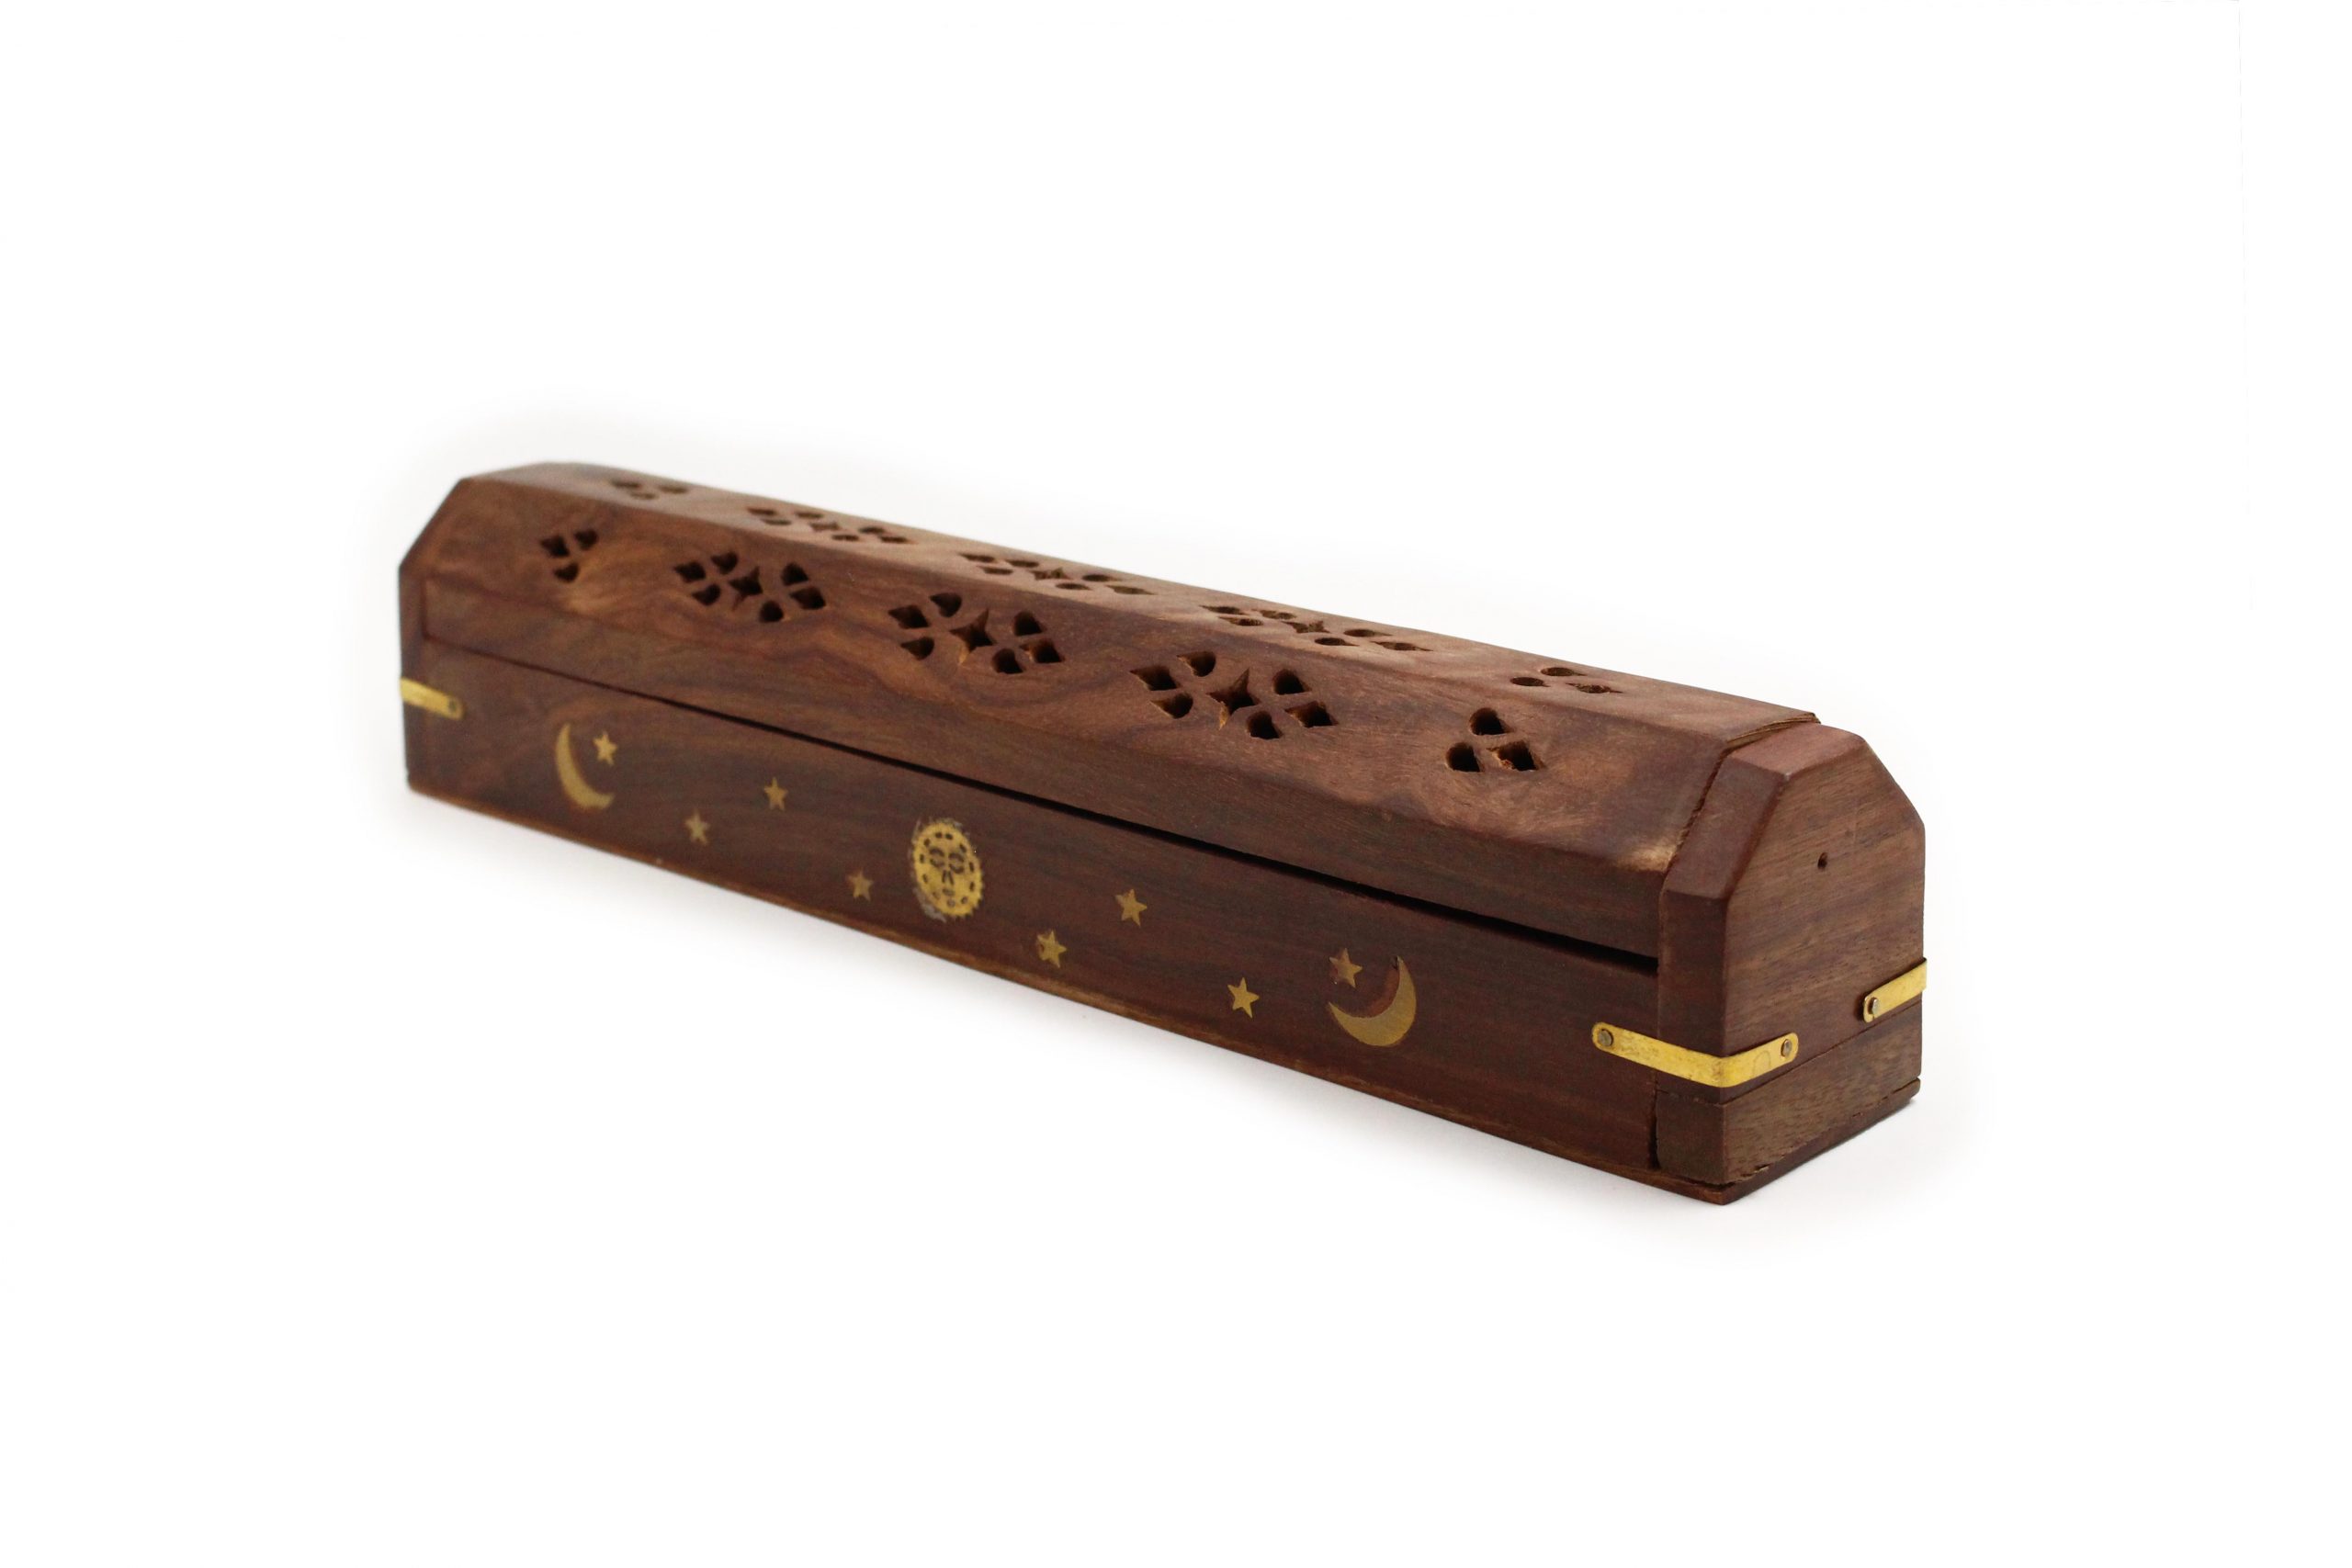 Small Moons & Stars Wood Incense Chest Holder - Crystal Dreams